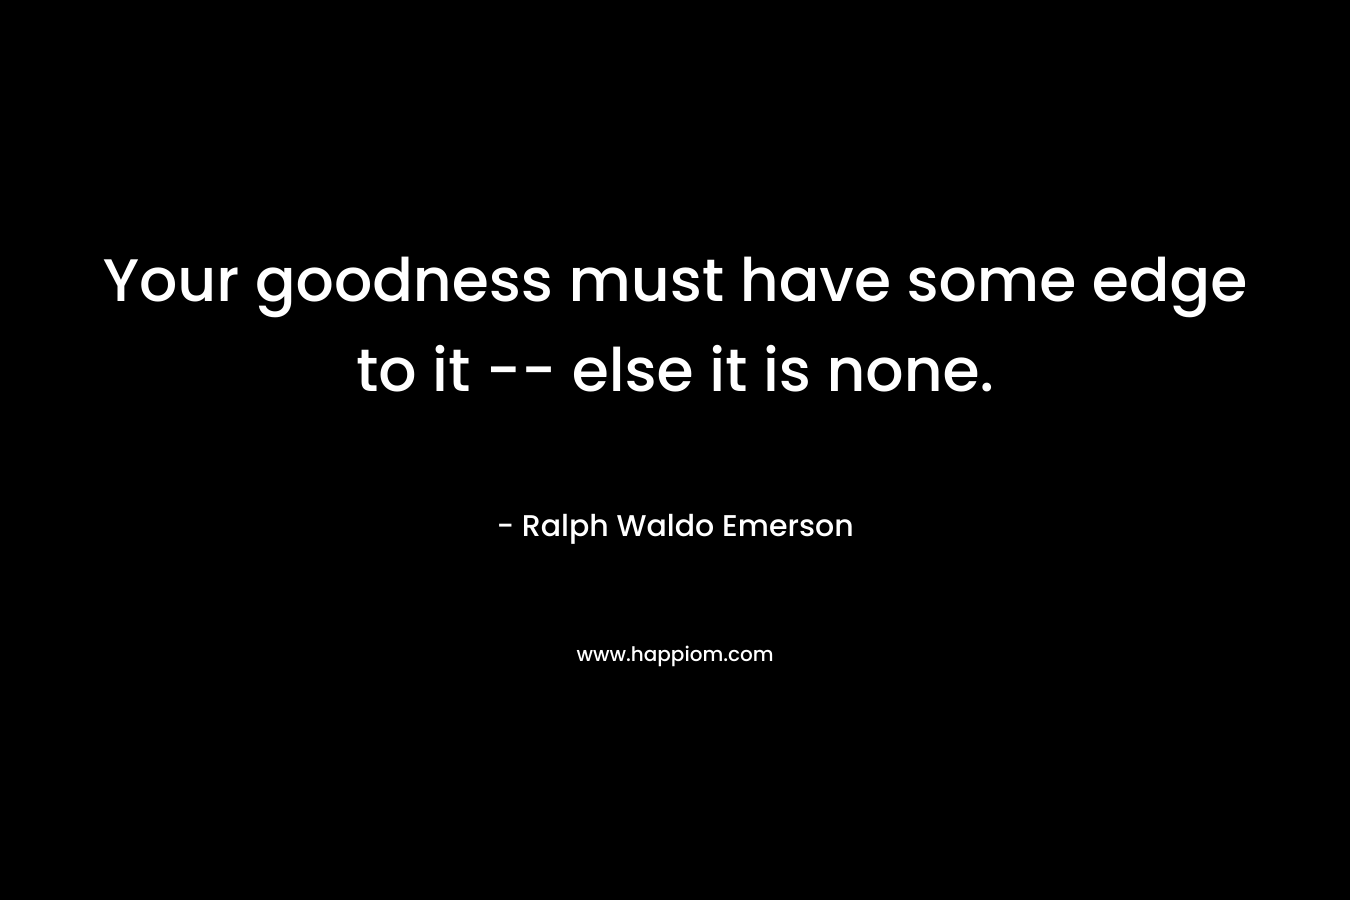 Your goodness must have some edge to it -- else it is none.